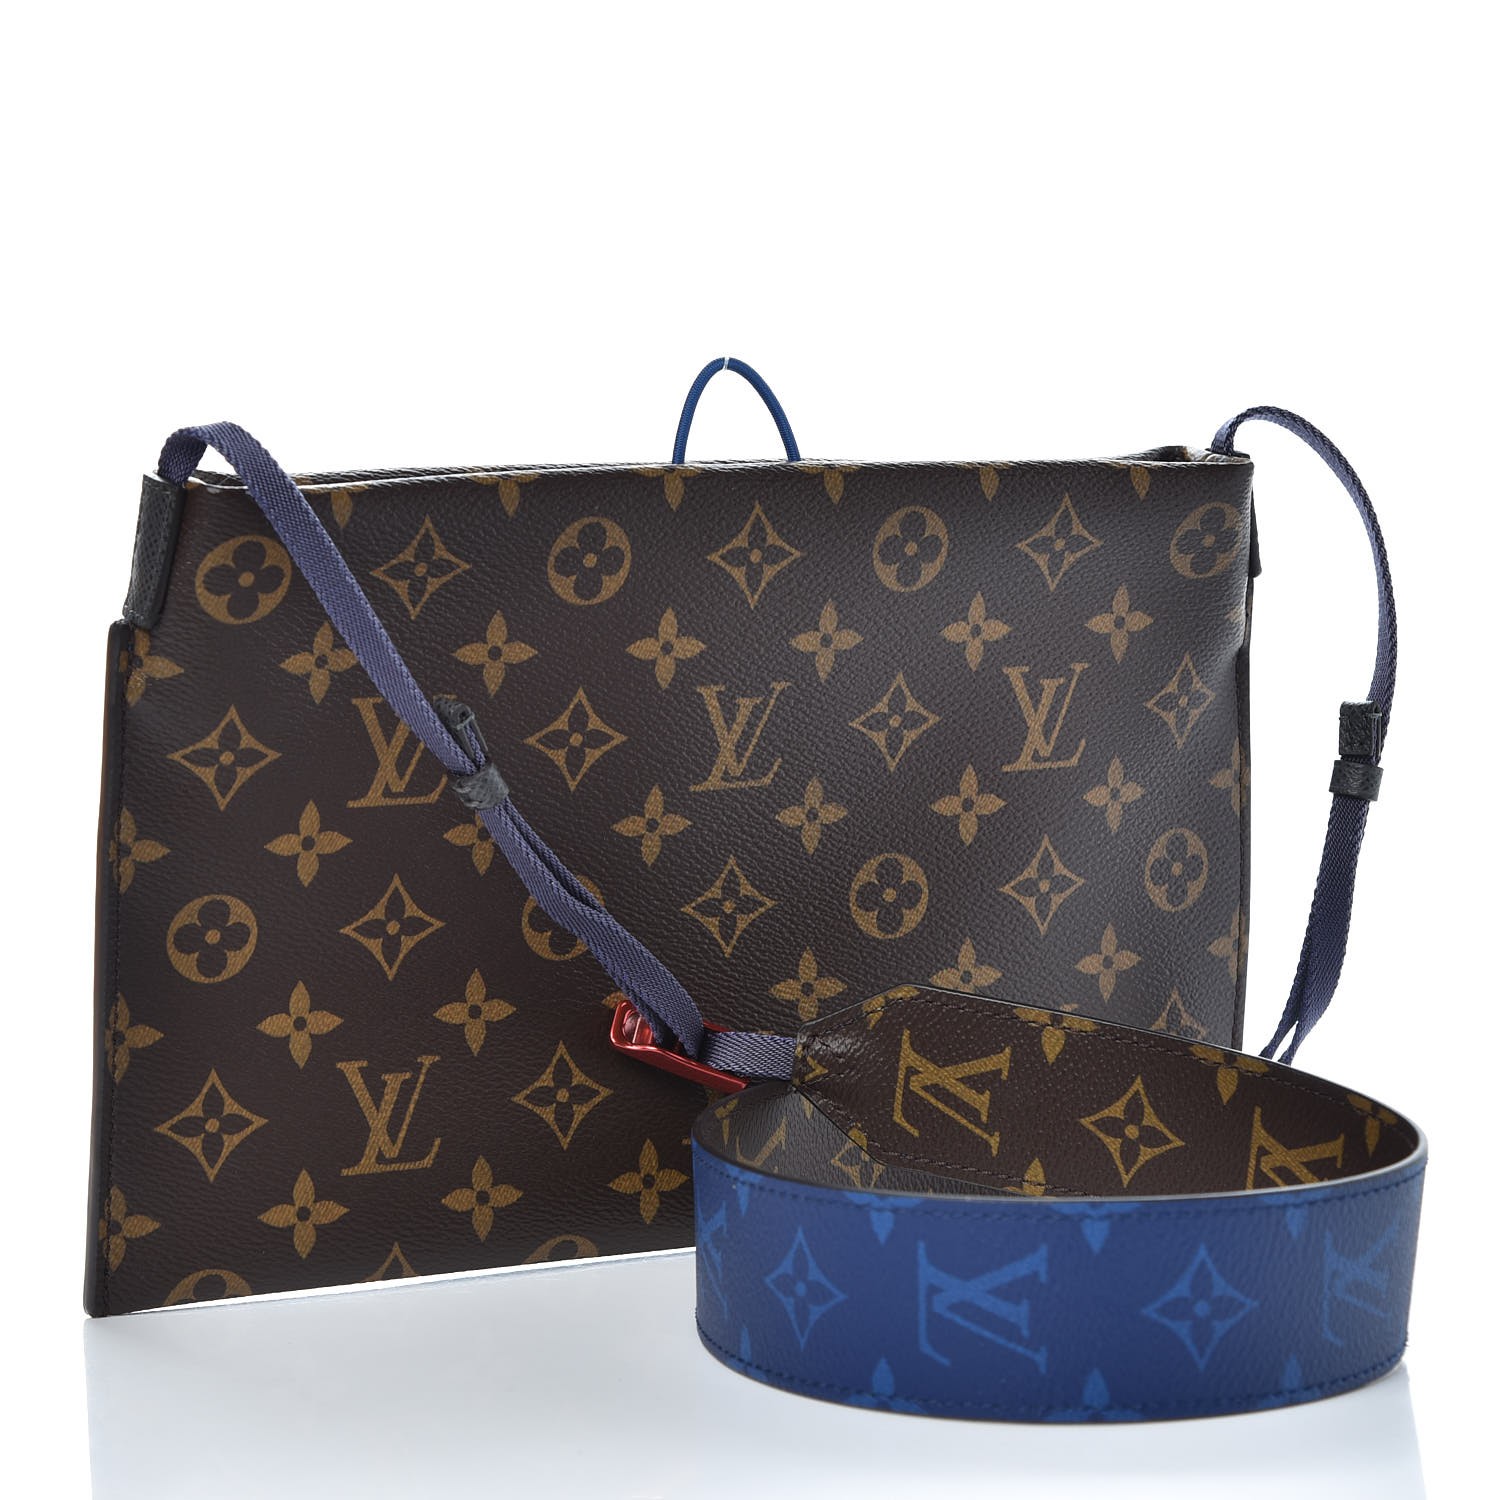 LOUIS VUITTON Monogram Small Outdoor Pouch Pacific Blue 344143